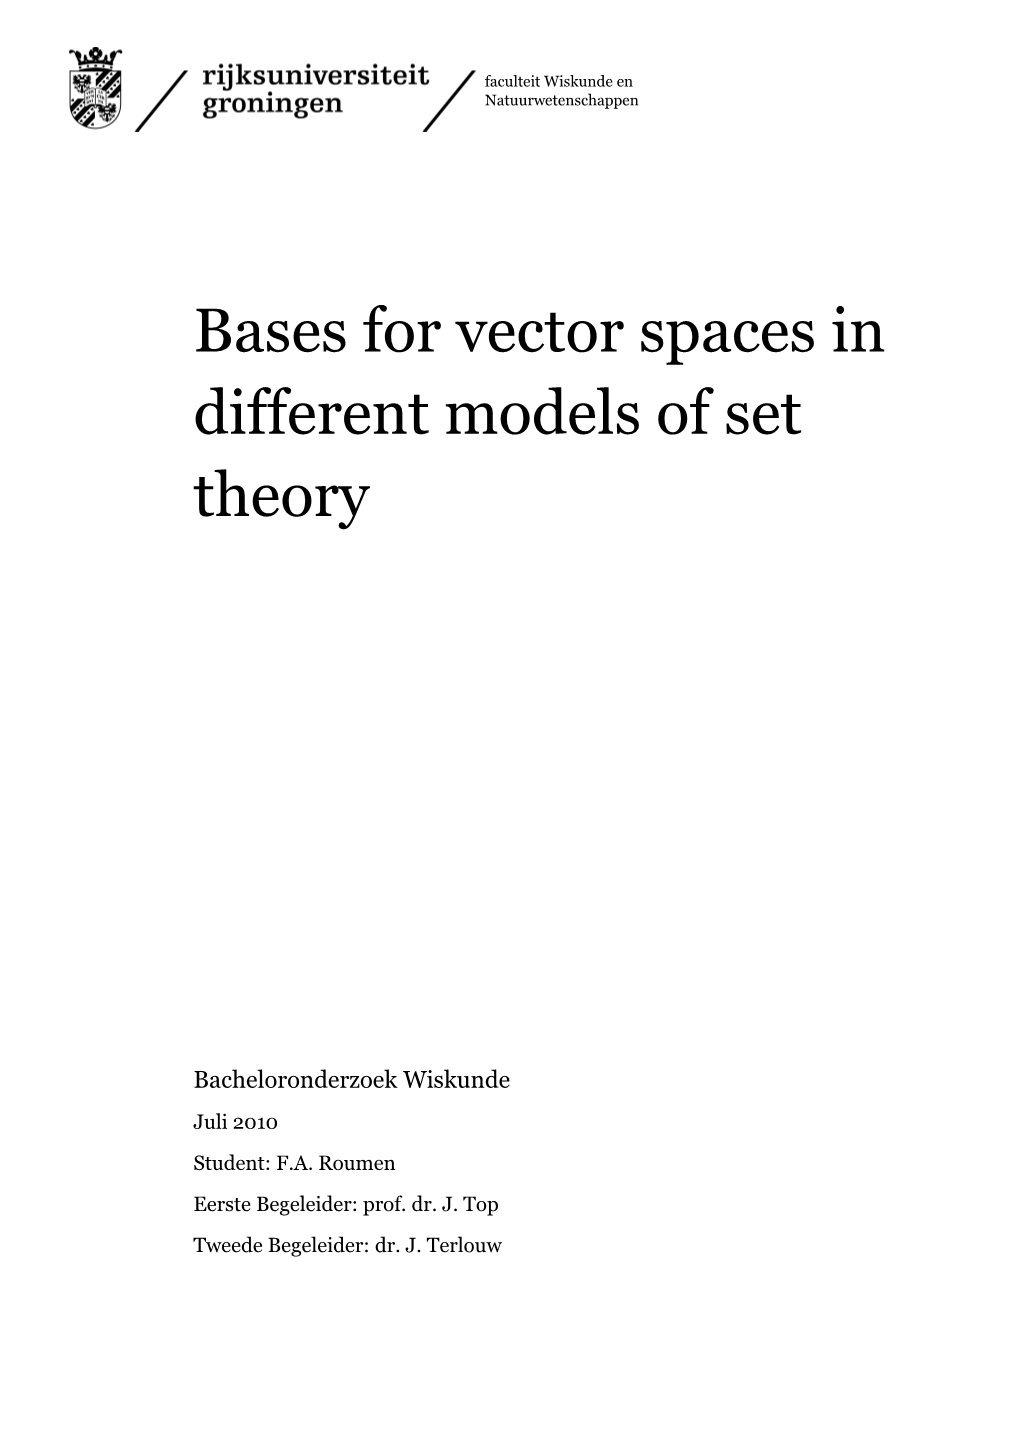 Bases for Vector Spaces in Different Models of Set Theory